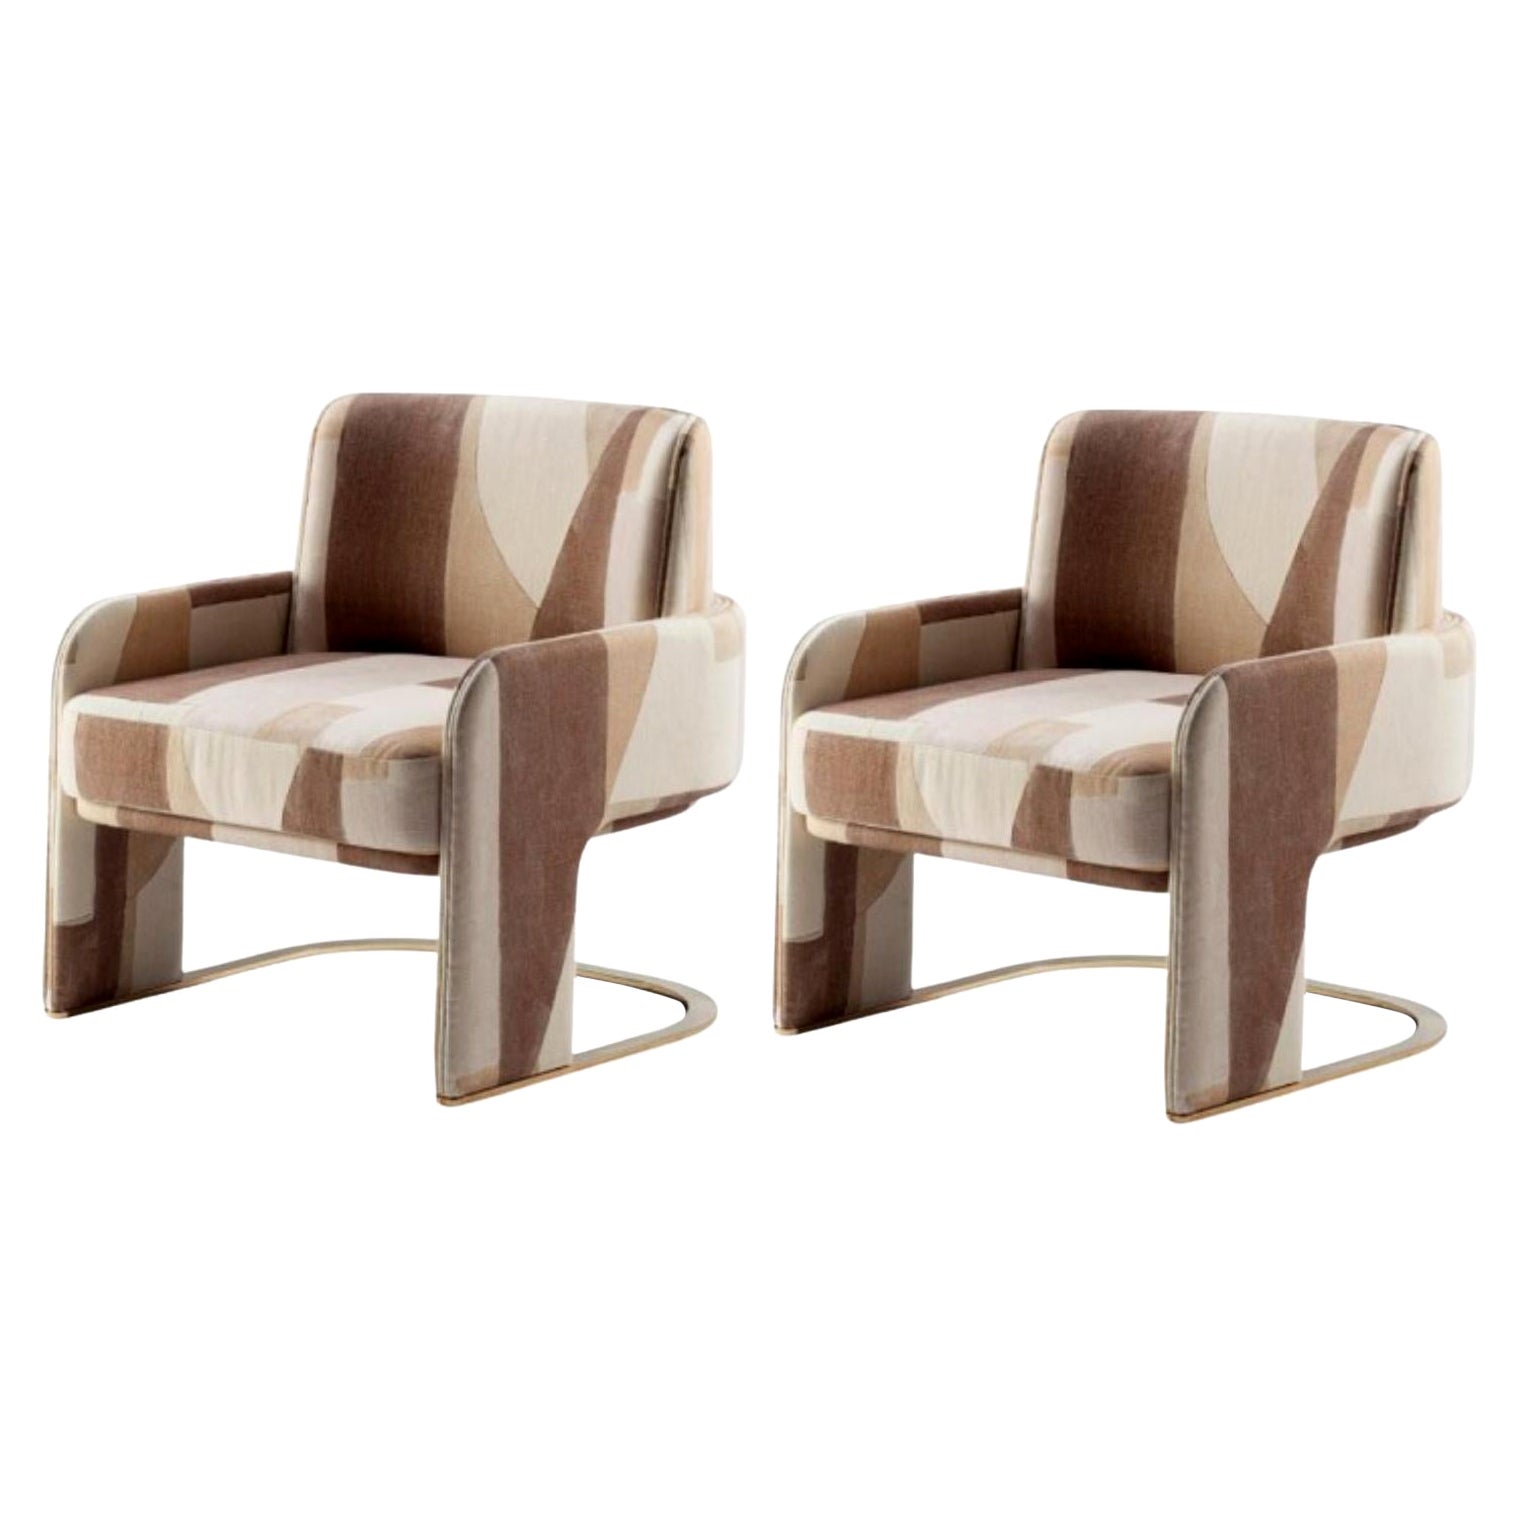 Set of 2 Odisseia Armchairs by Dooq